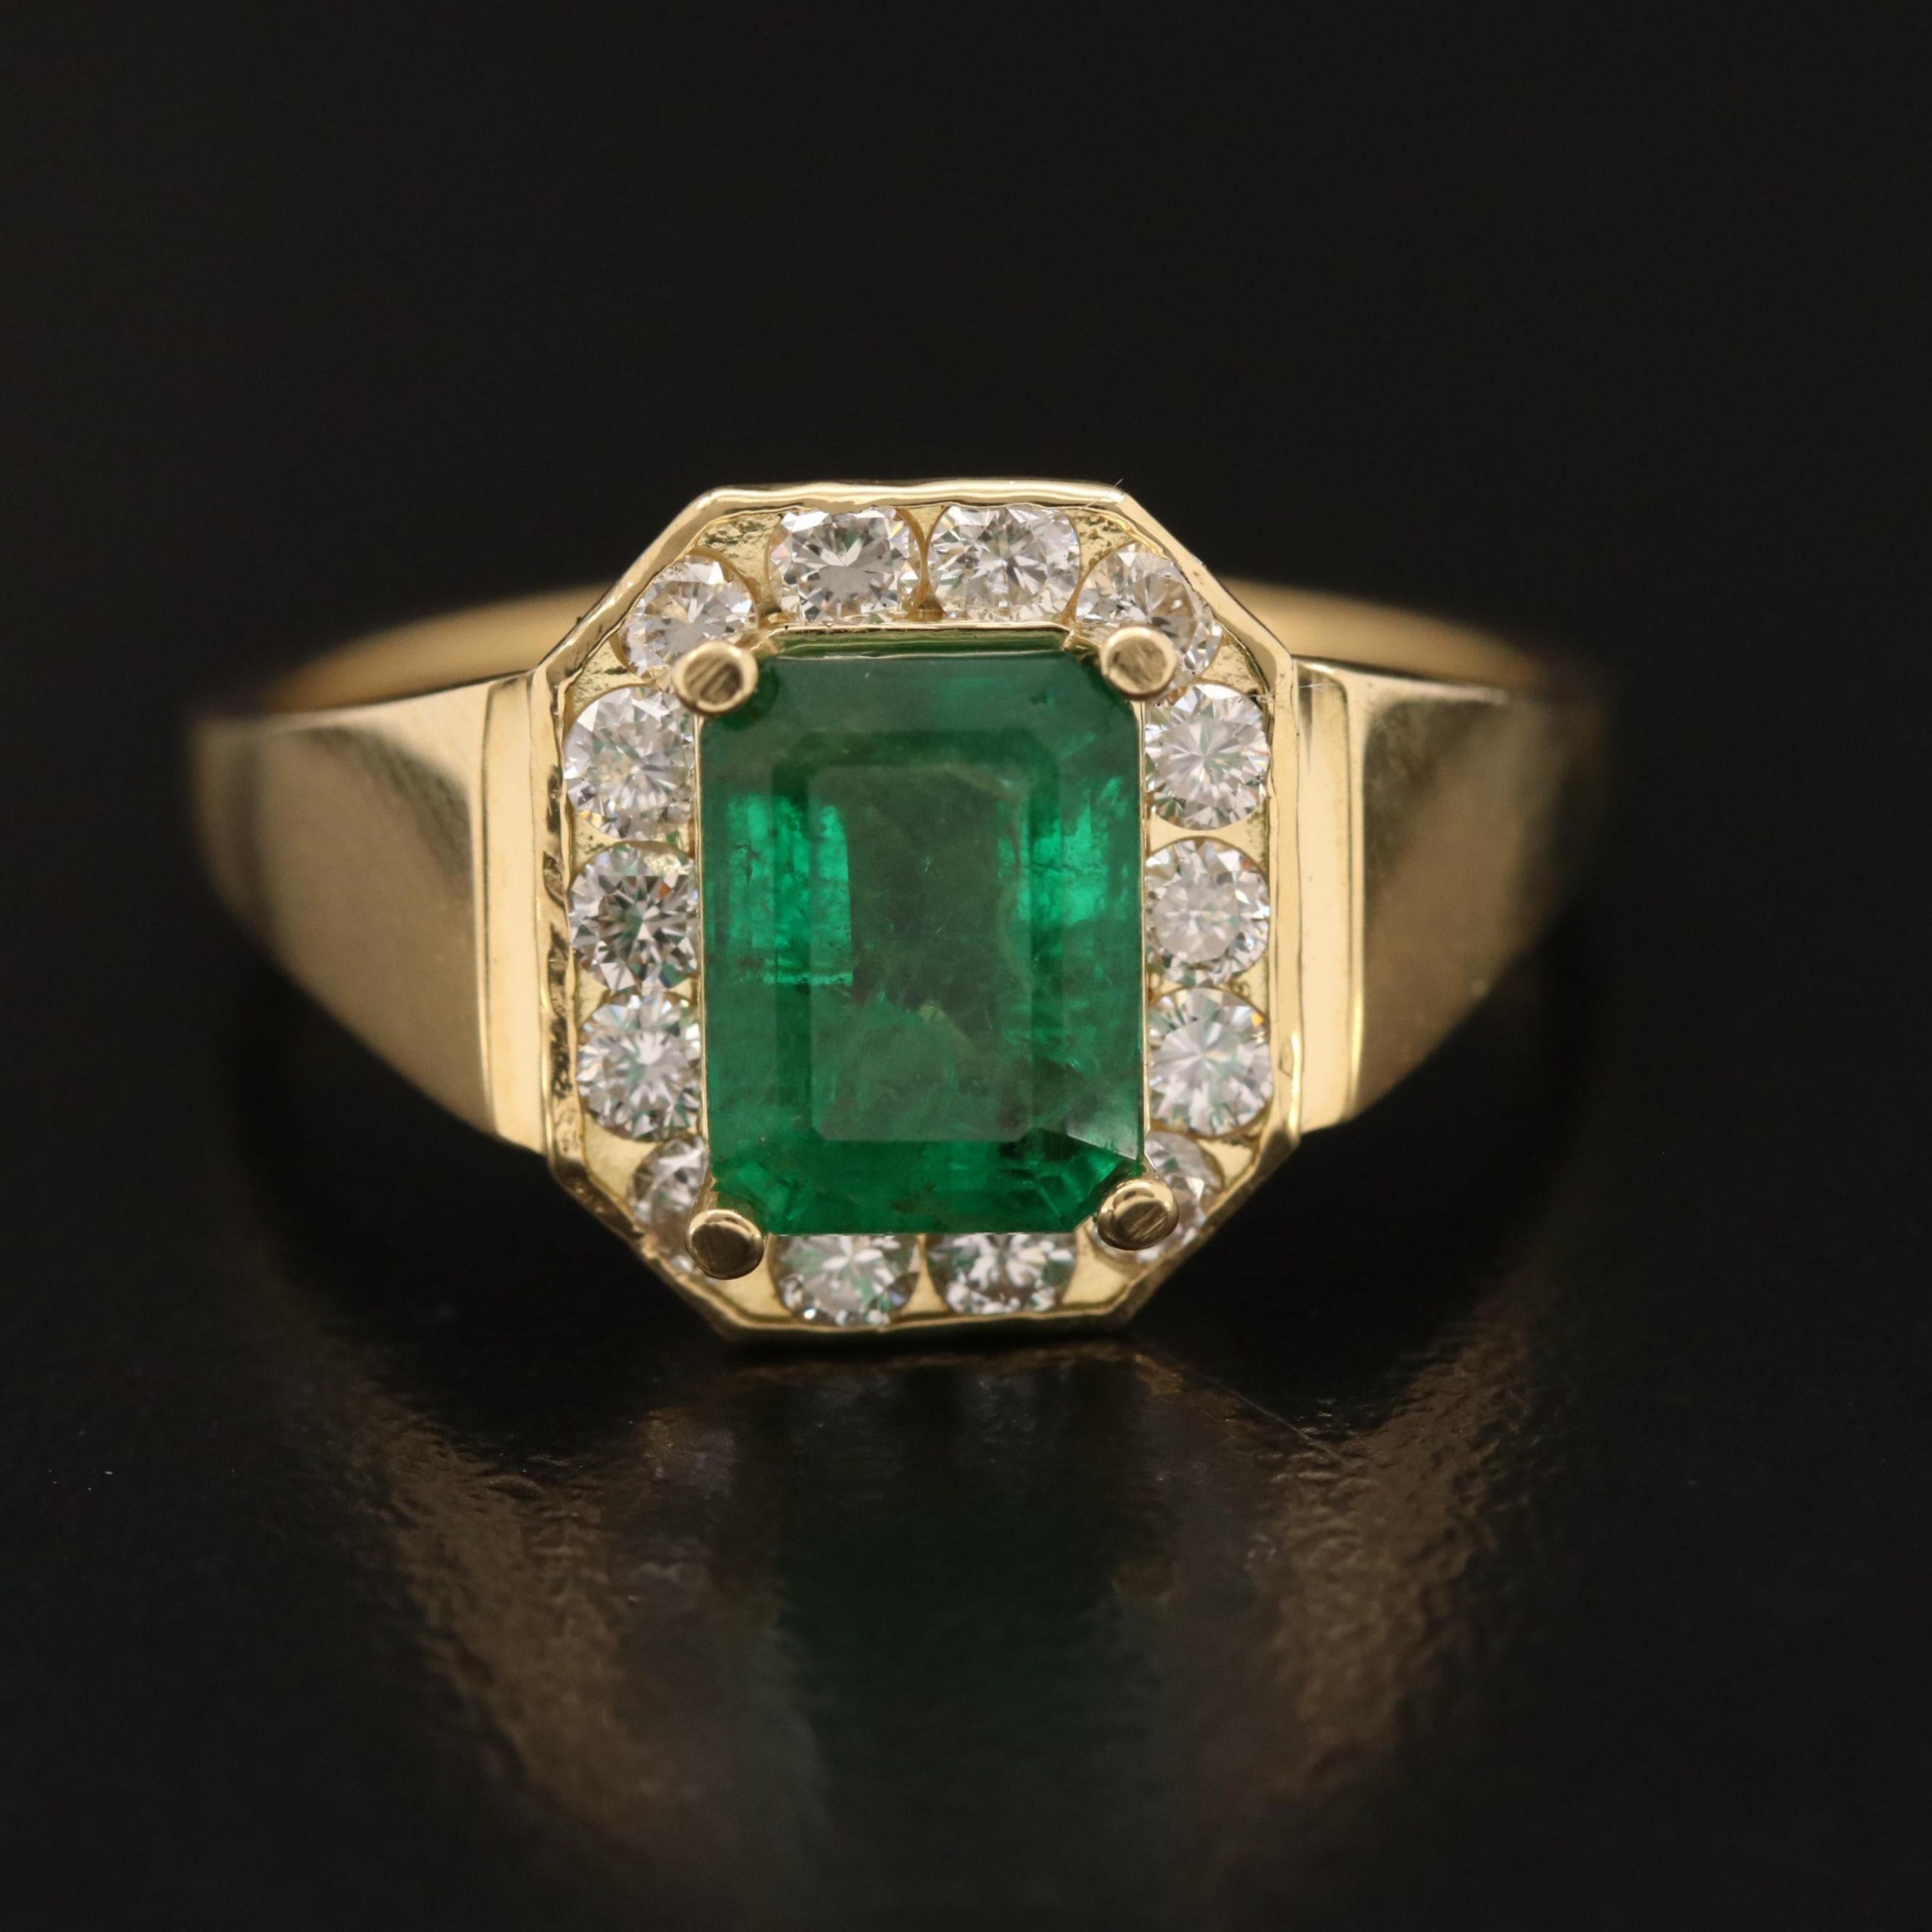 For Sale:  Halo Emerald Diamond Engagement Ring, Emerald Cut Emerald Wedding Ring for Her 5